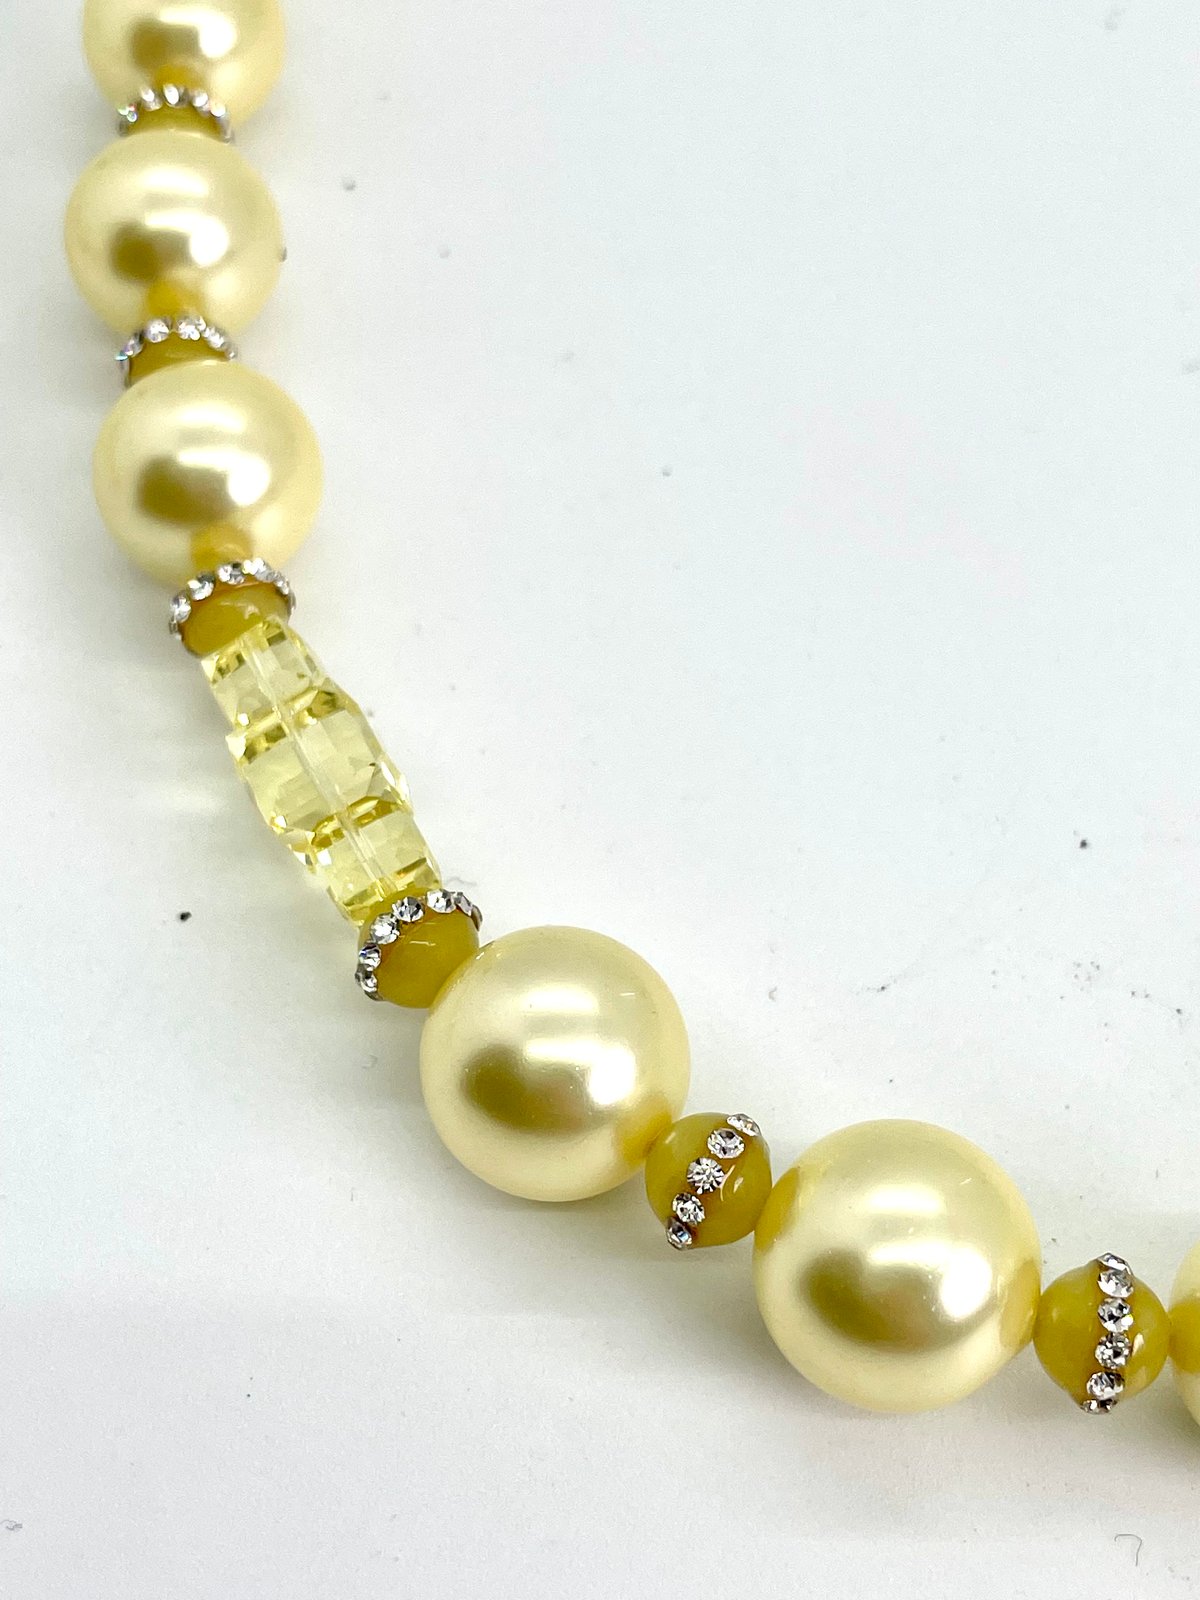 Yellow Natural Pearls & Yellow Jade Necklace w/Earrings included